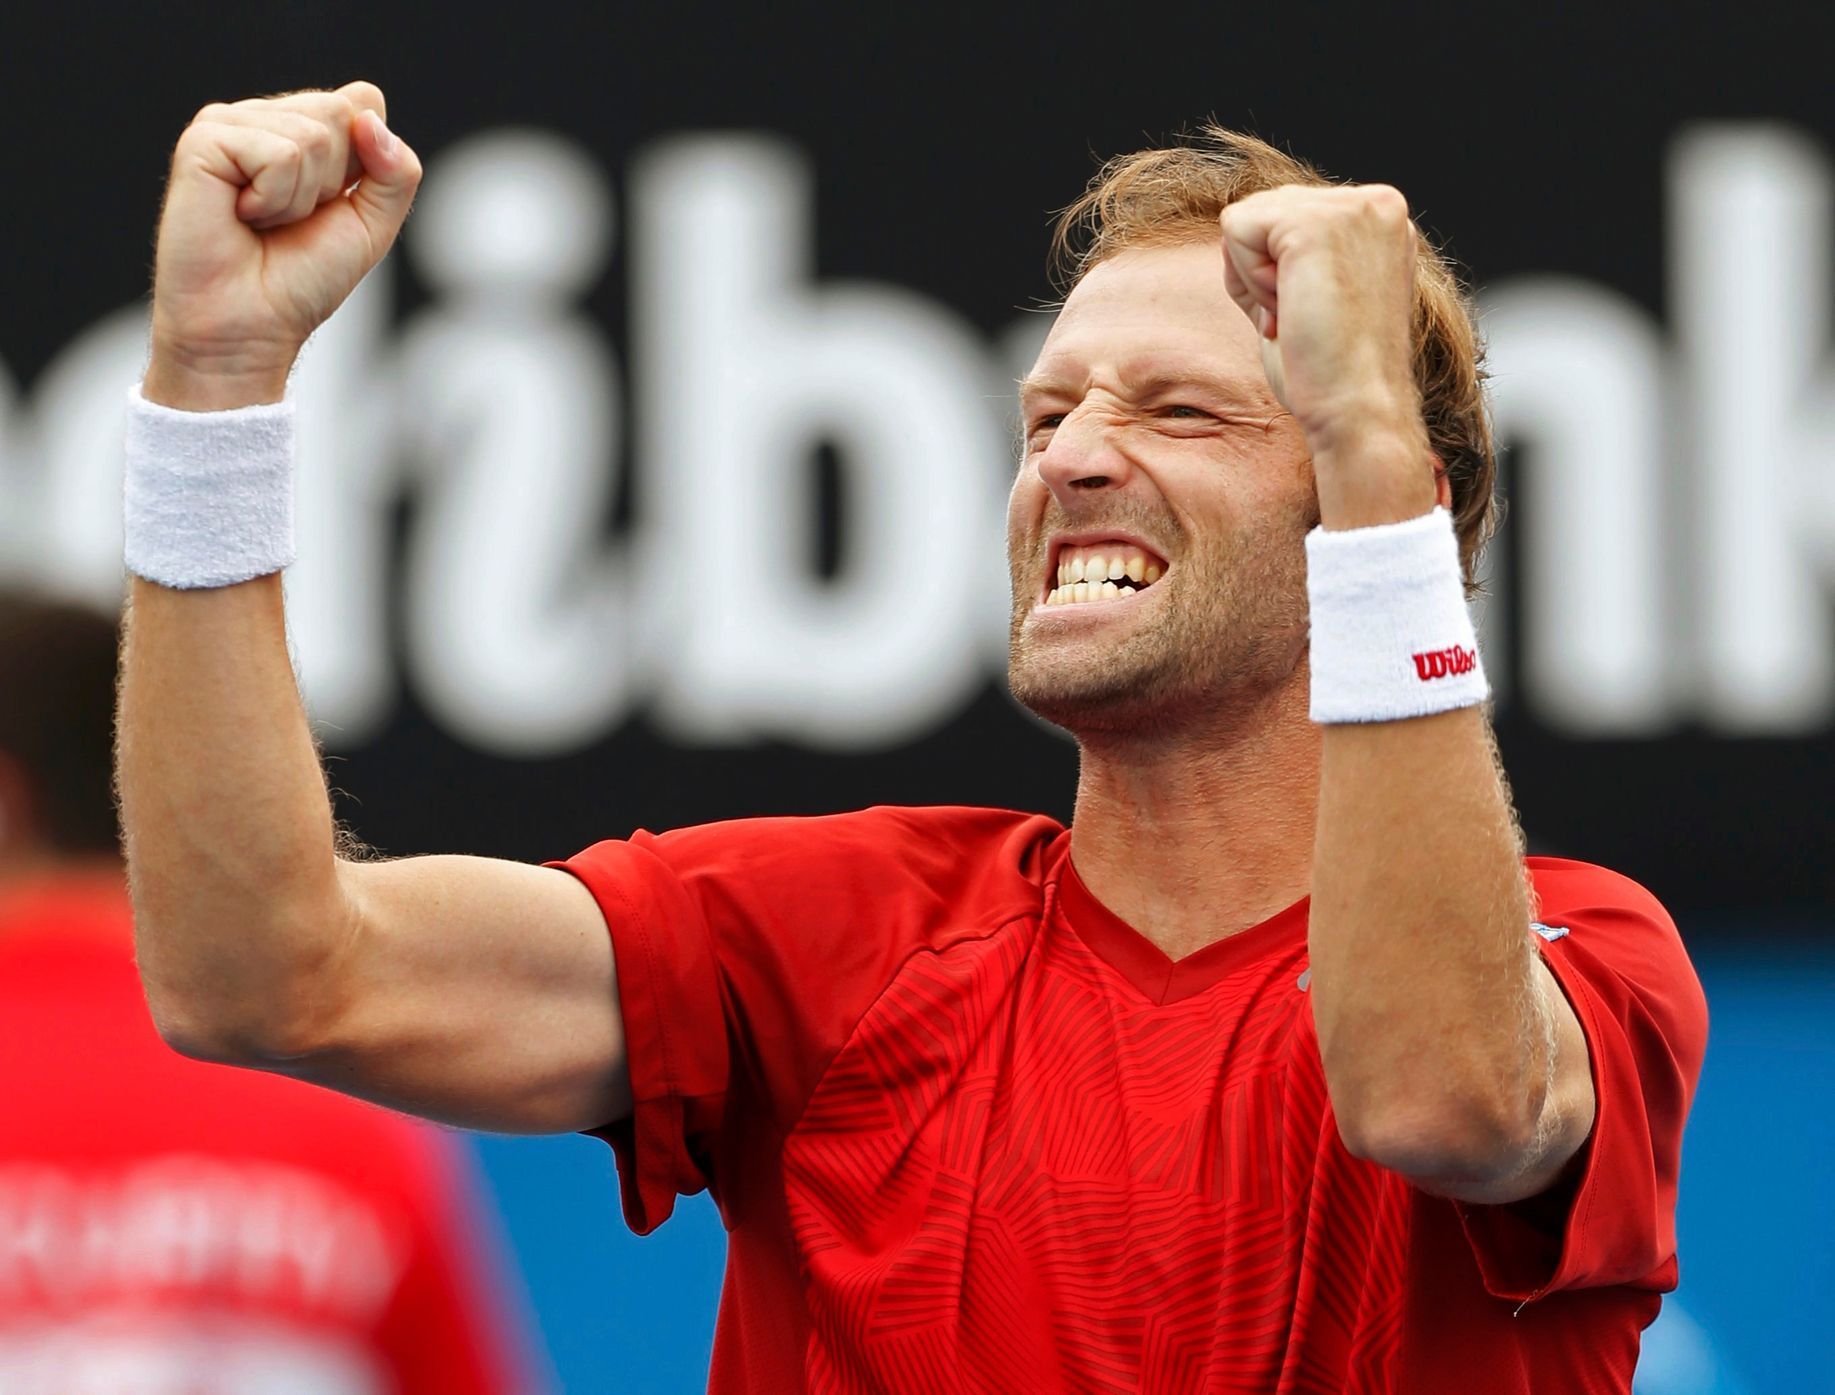 Stephane Robert of France celebrates defeating Martin Klizan of Slovakia during their men's singles match at the Australian Open 2014 tennis tournament in Melbourne